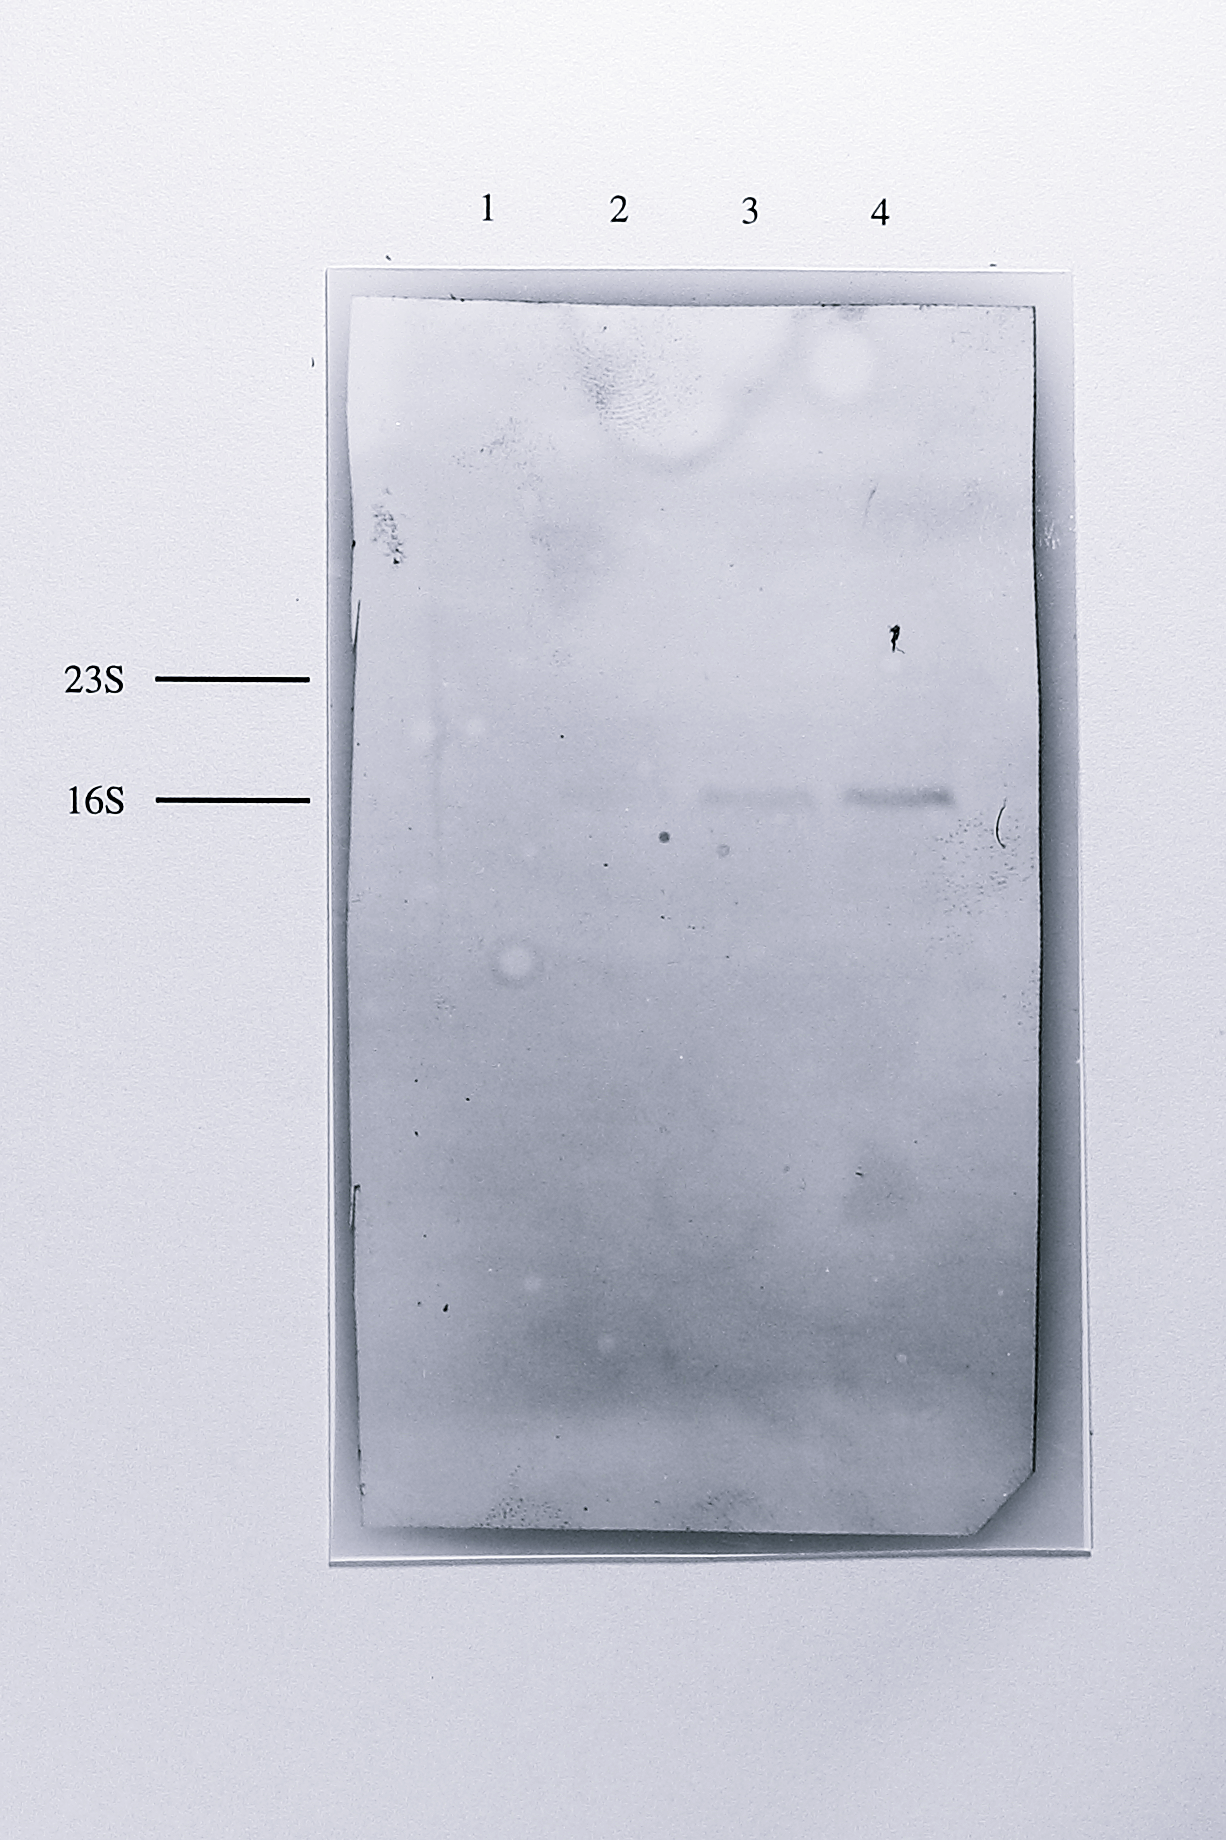 Northern blot of total RNA from anaerobically grown _T. pantotropha_ using a _nirS_-derived probe. 10 $\mu$g of RNA from _E. coli_ (lane 1) and 5, 10 and 20 $\mu$g of RNA from anaerobically grown _T. pantotropha_ (lanes 2-4) were separated by electrophoresis on a 1% agarose-formaldehyde gel transferred to a positive nylon membrane and hybridised with a probe to the _nirS_ gene, labelled with digoxigenin alkaline-phosphatase conjugate. After washing, the hybridised probe was detected colorimetrically. A single band with a mobility of approximately 1.85 kb was detected in the lanes containing RNA from _T. pantotropha_. The relative positions of the 23S (2904 bases) and 16S (1542 bases) ribosomal RNA species are shown at the left of the blot.